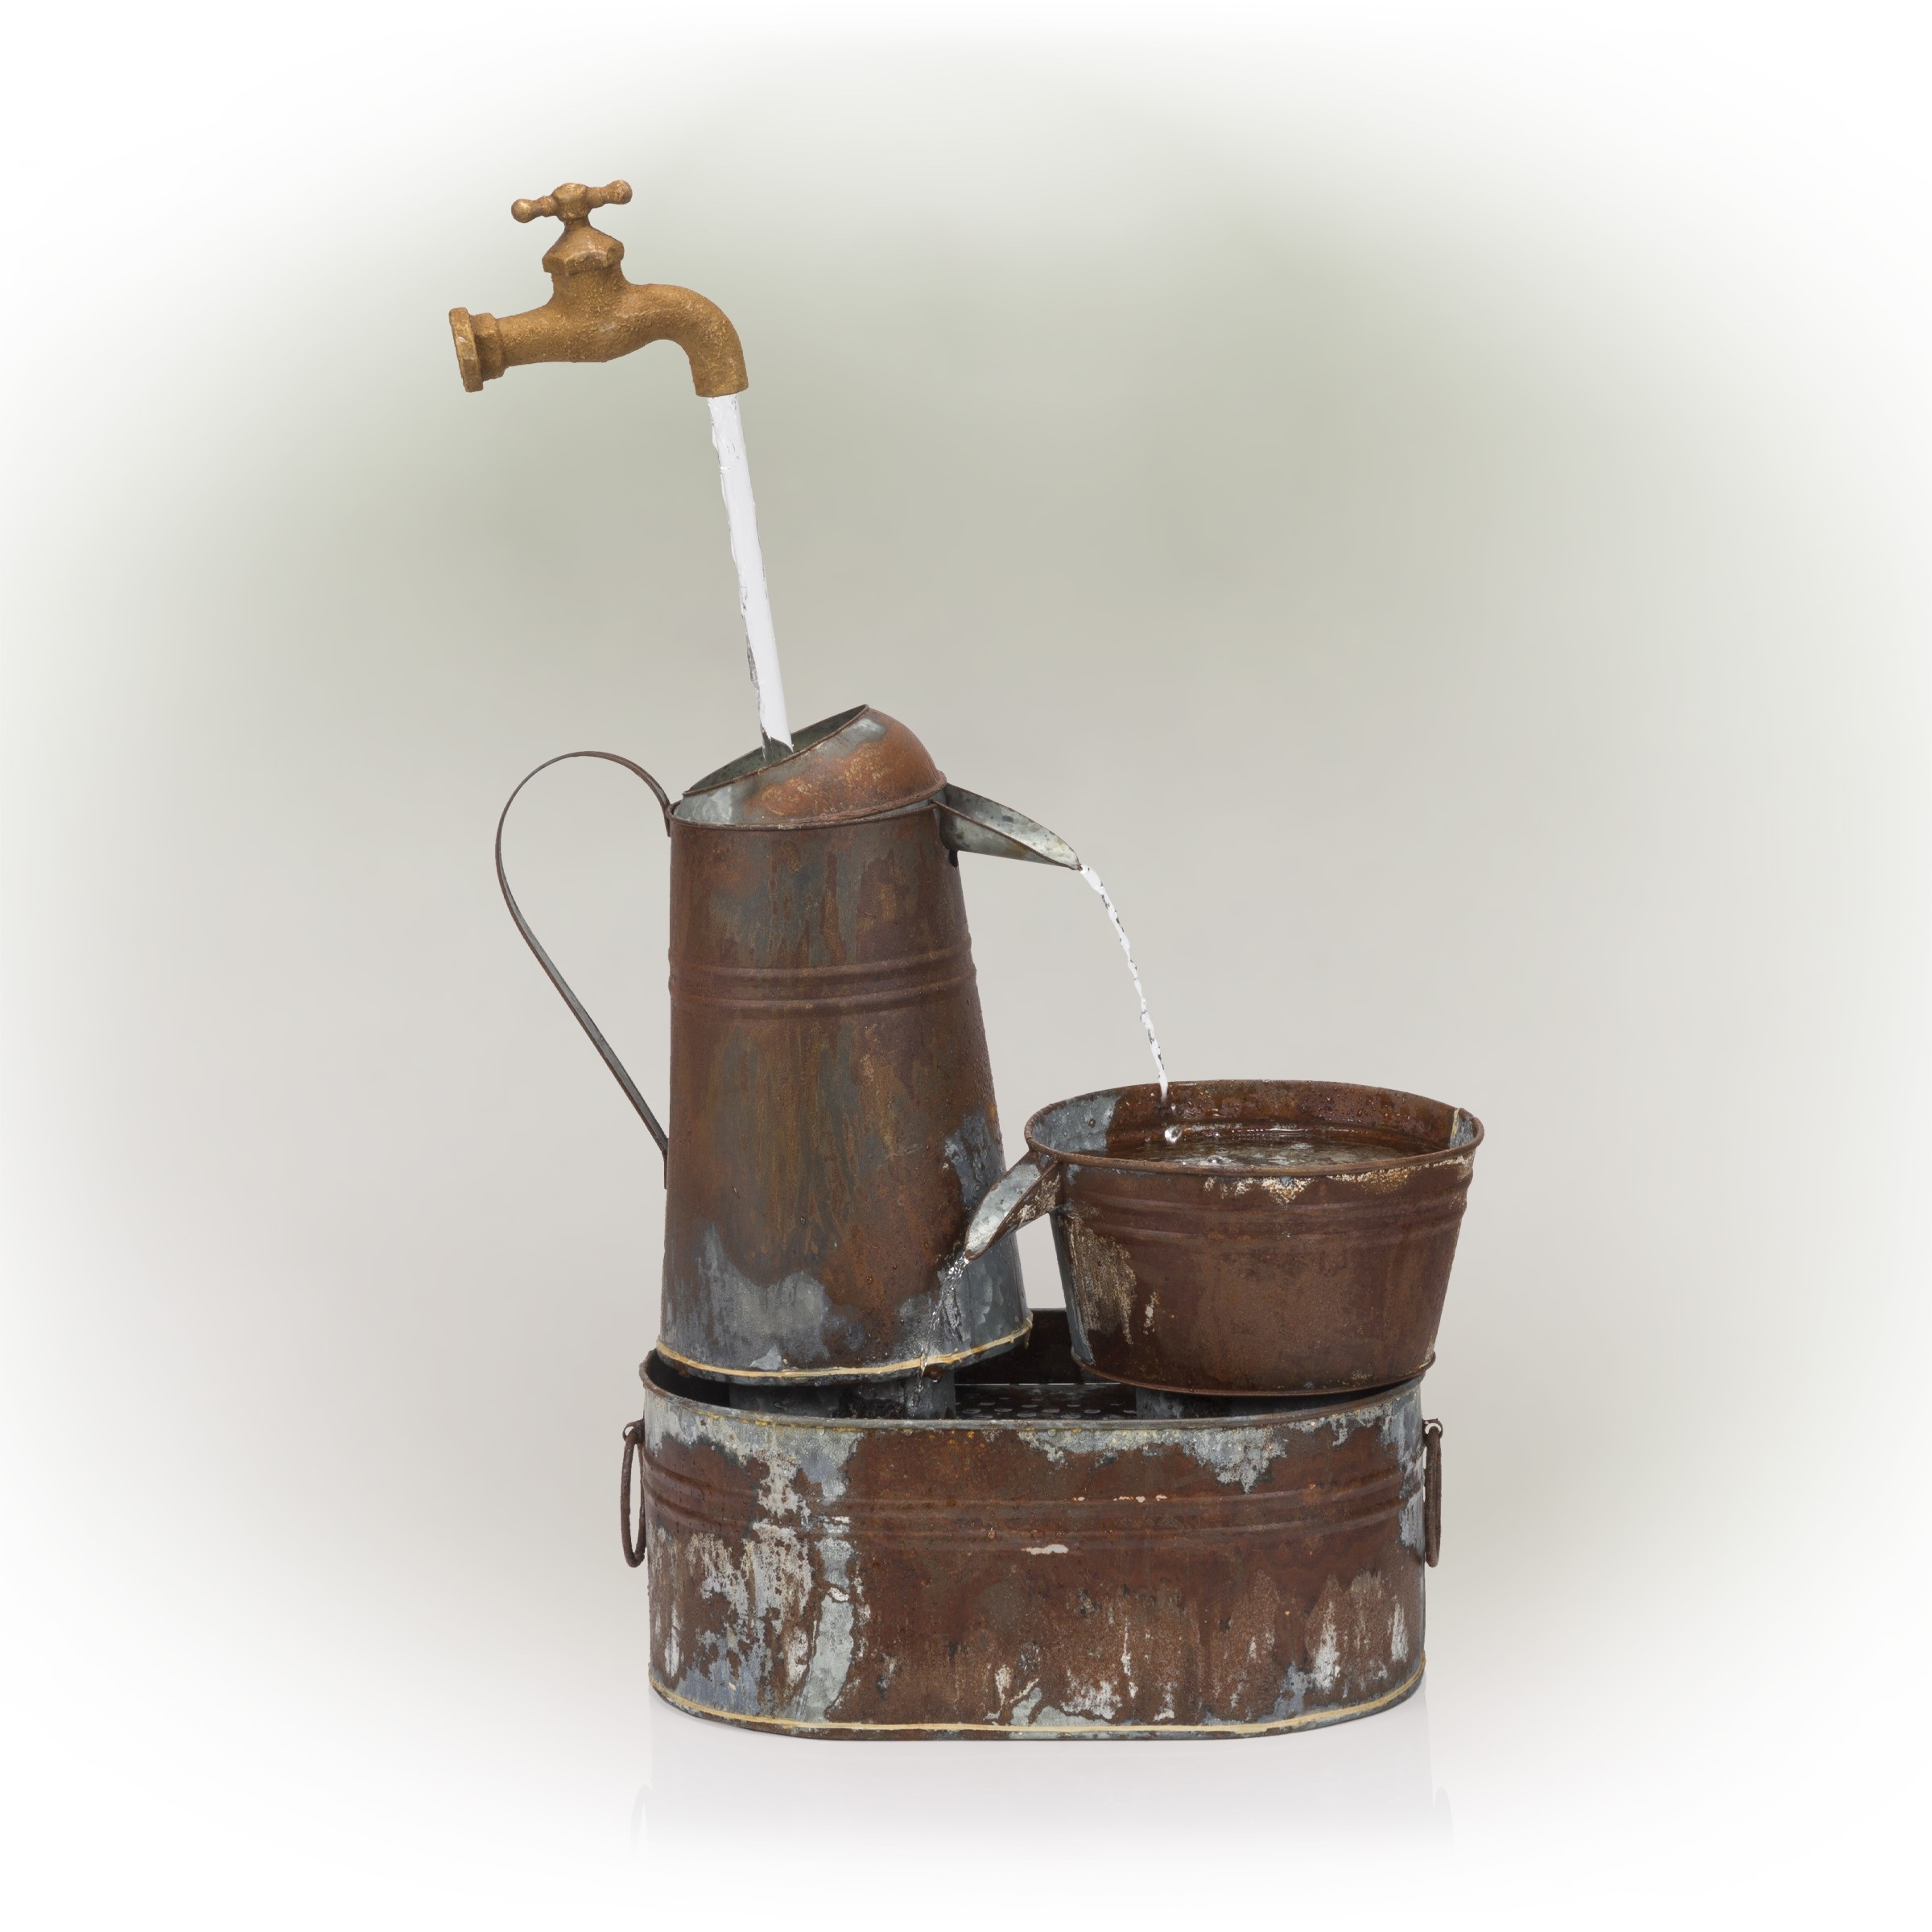 34" RUSTIC INVISIBLE FLOWING SPOUT WATERING CAN FOUNTAIN